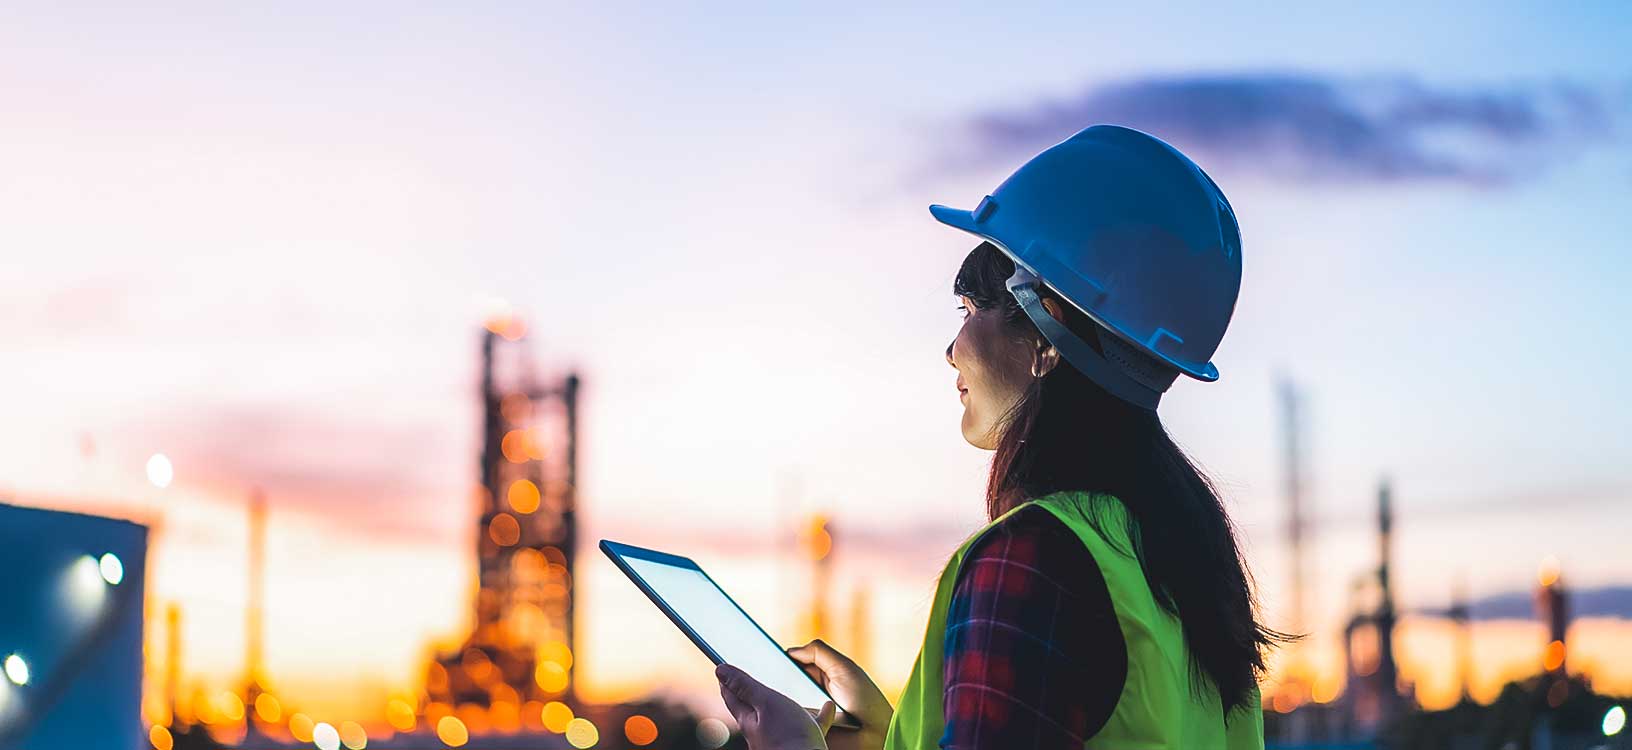 petrochemical engineer working at night with digital tablet